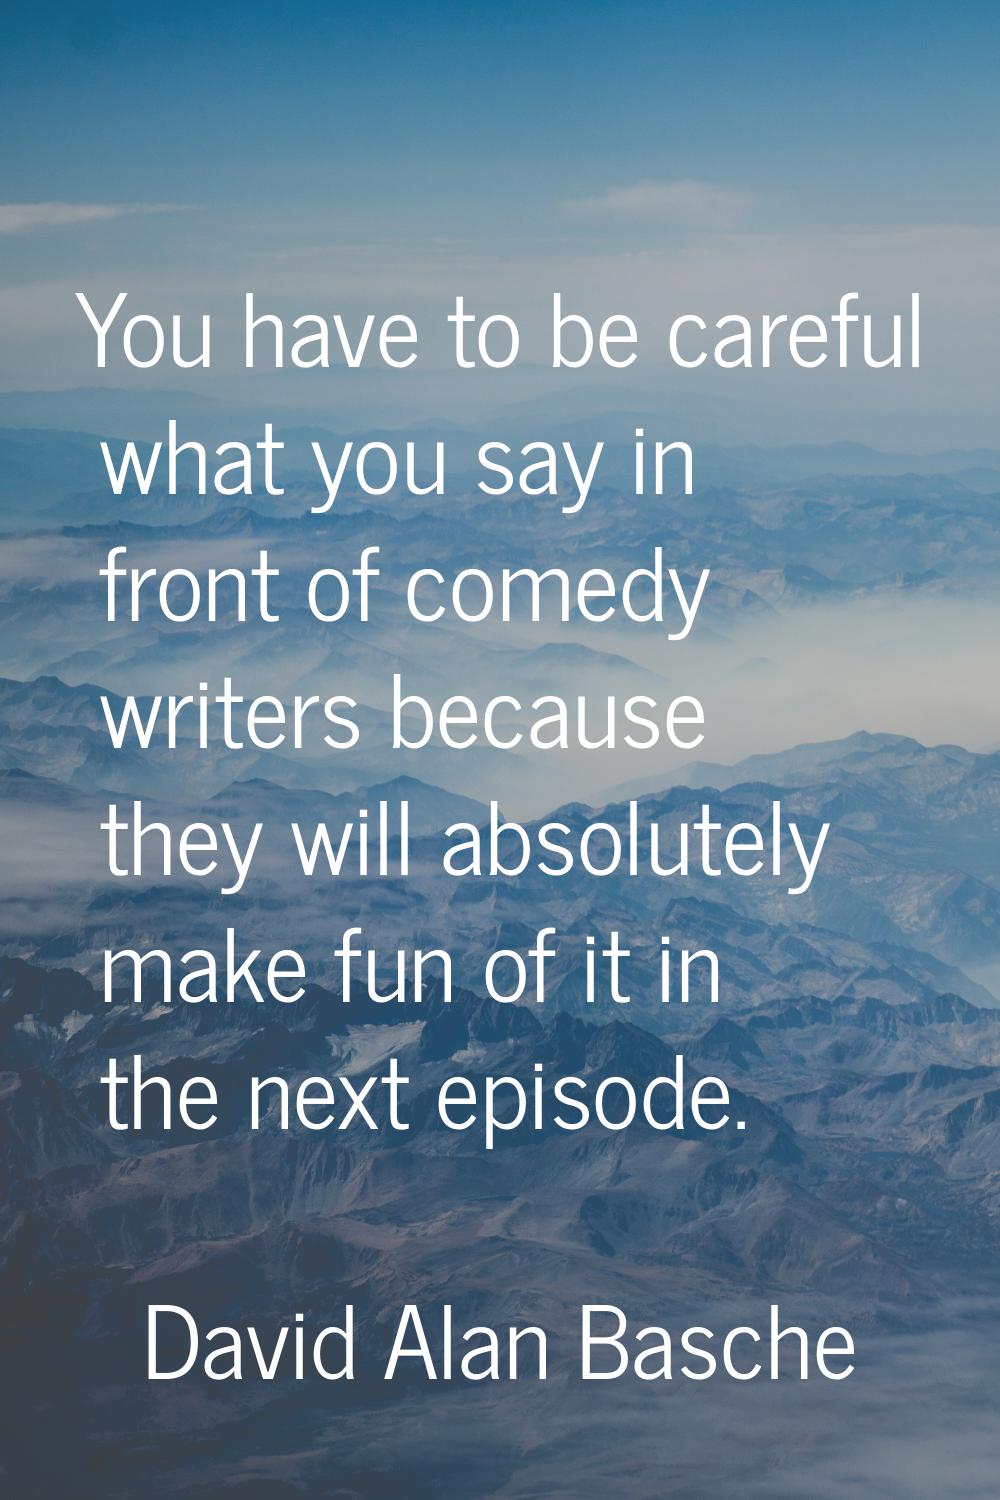 You have to be careful what you say in front of comedy writers because they will absolutely make fu